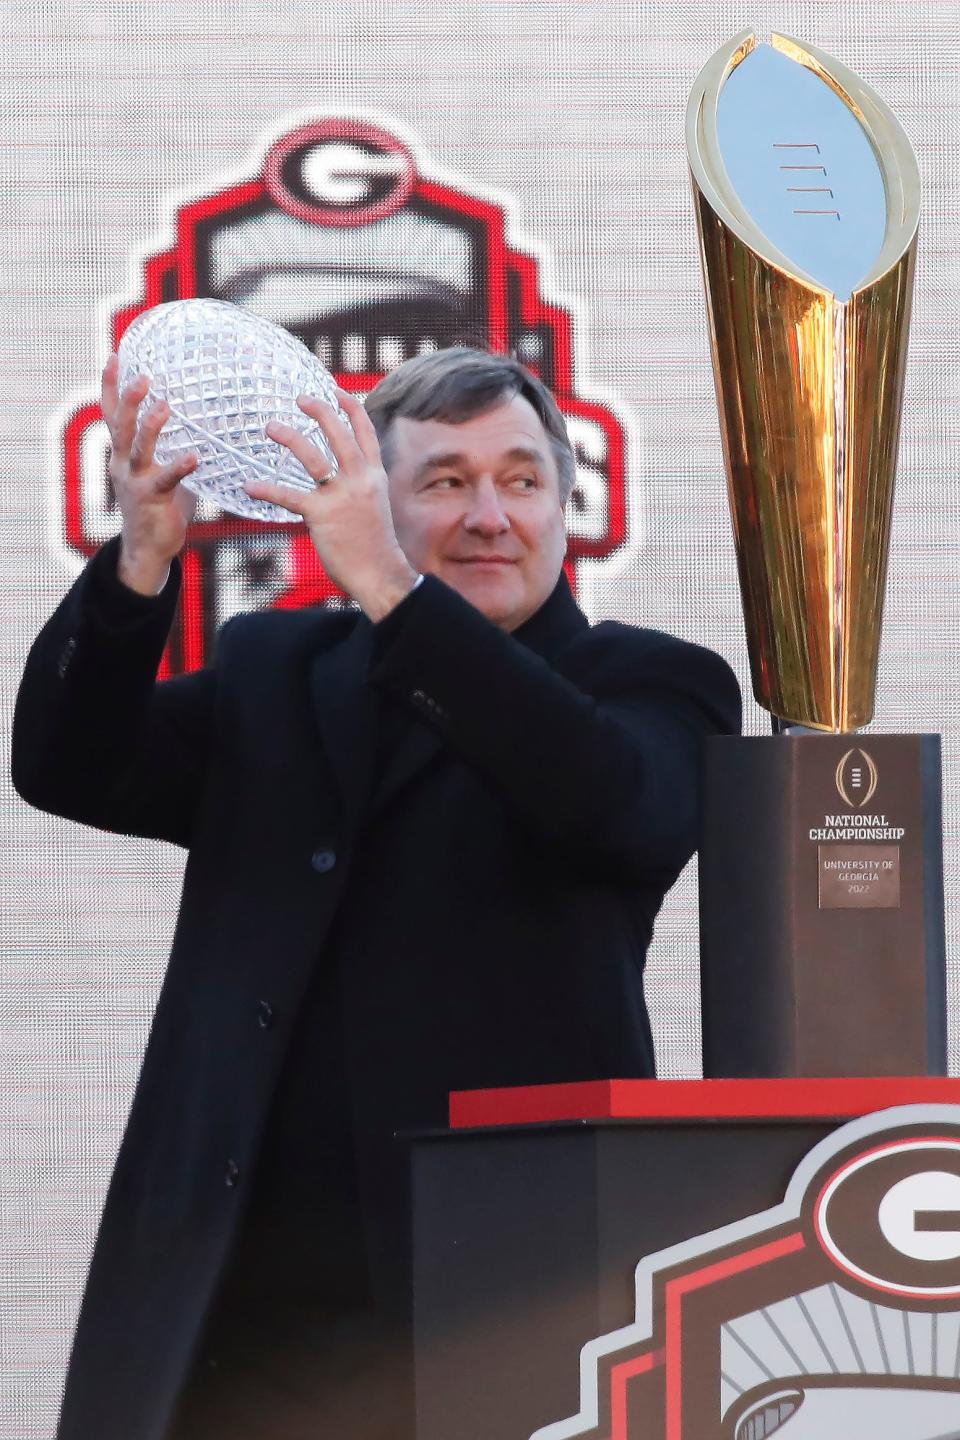 Georgia coach Kirby Smart is presented with the AFCA National Championship Coaches' Trophy during Georgia's back to back National Championship celebration in Athens, Ga., on Saturday, Jan. 14, 2023.